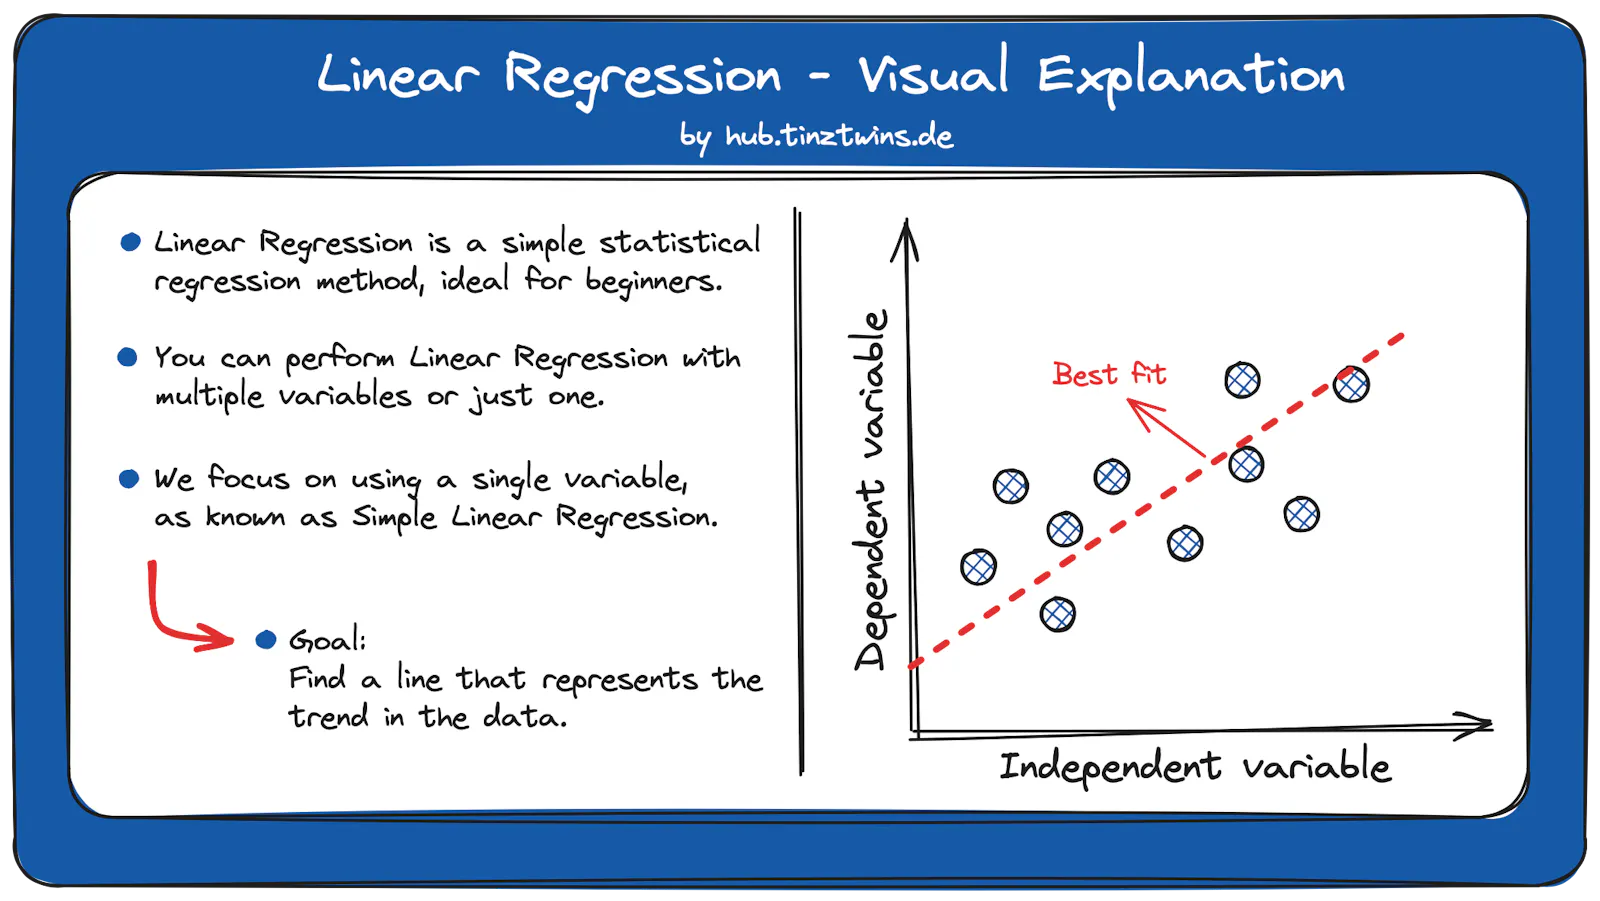 Linear Regression - Visual Explanation (Image by authors)